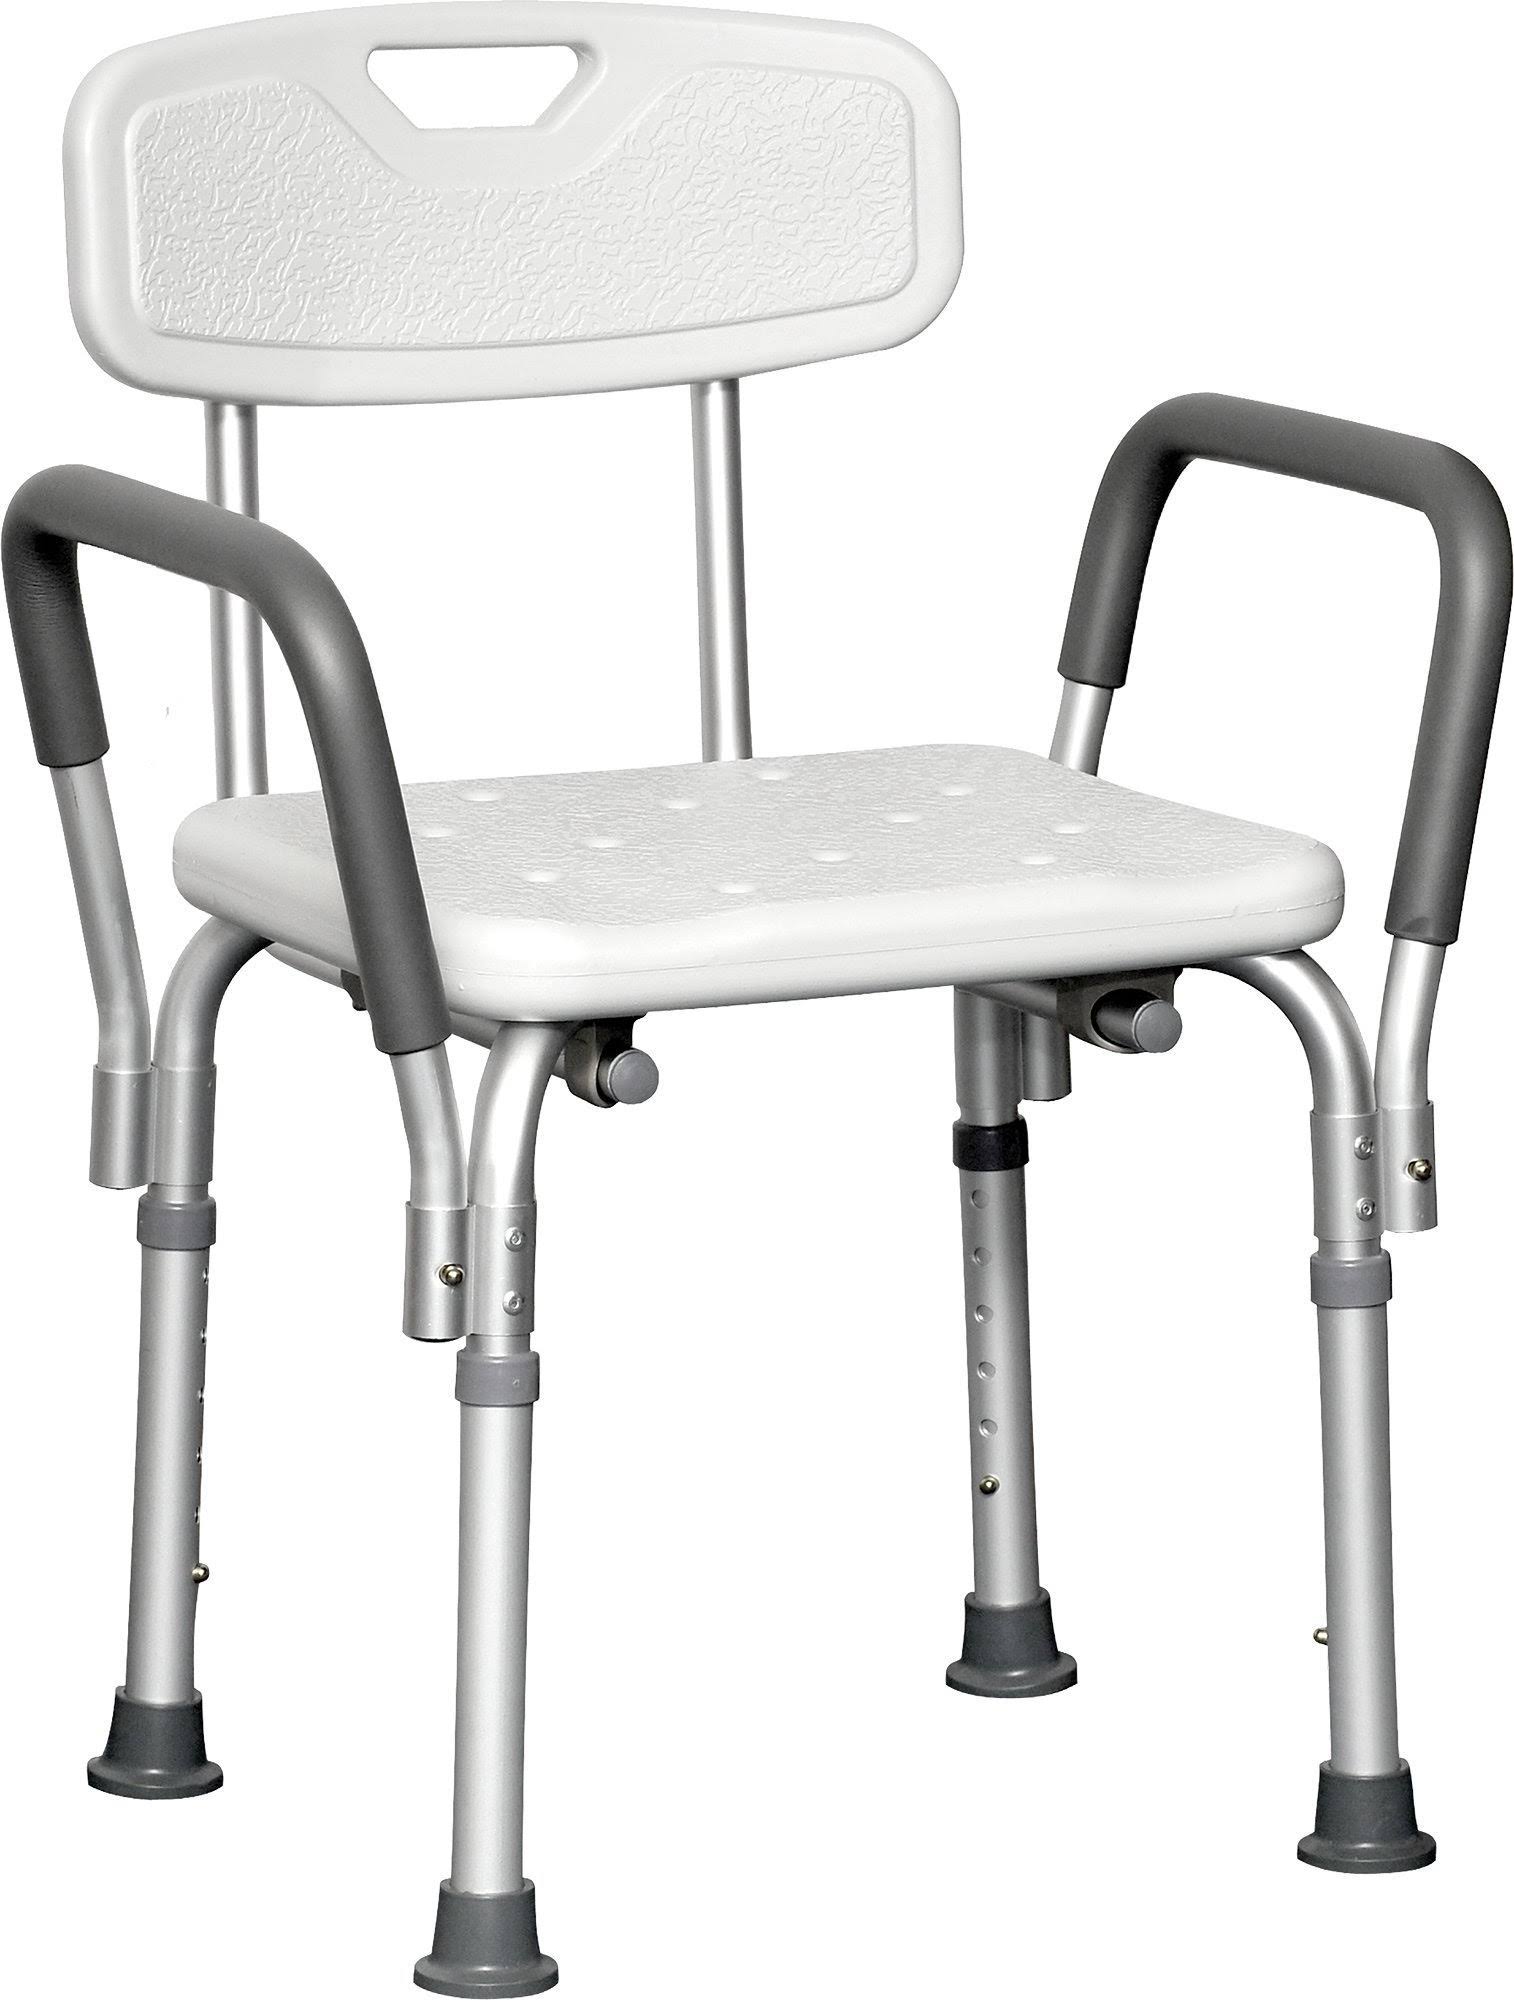 ProBasics Shower Chair with Back and Arms, 300lb Weight Capacity